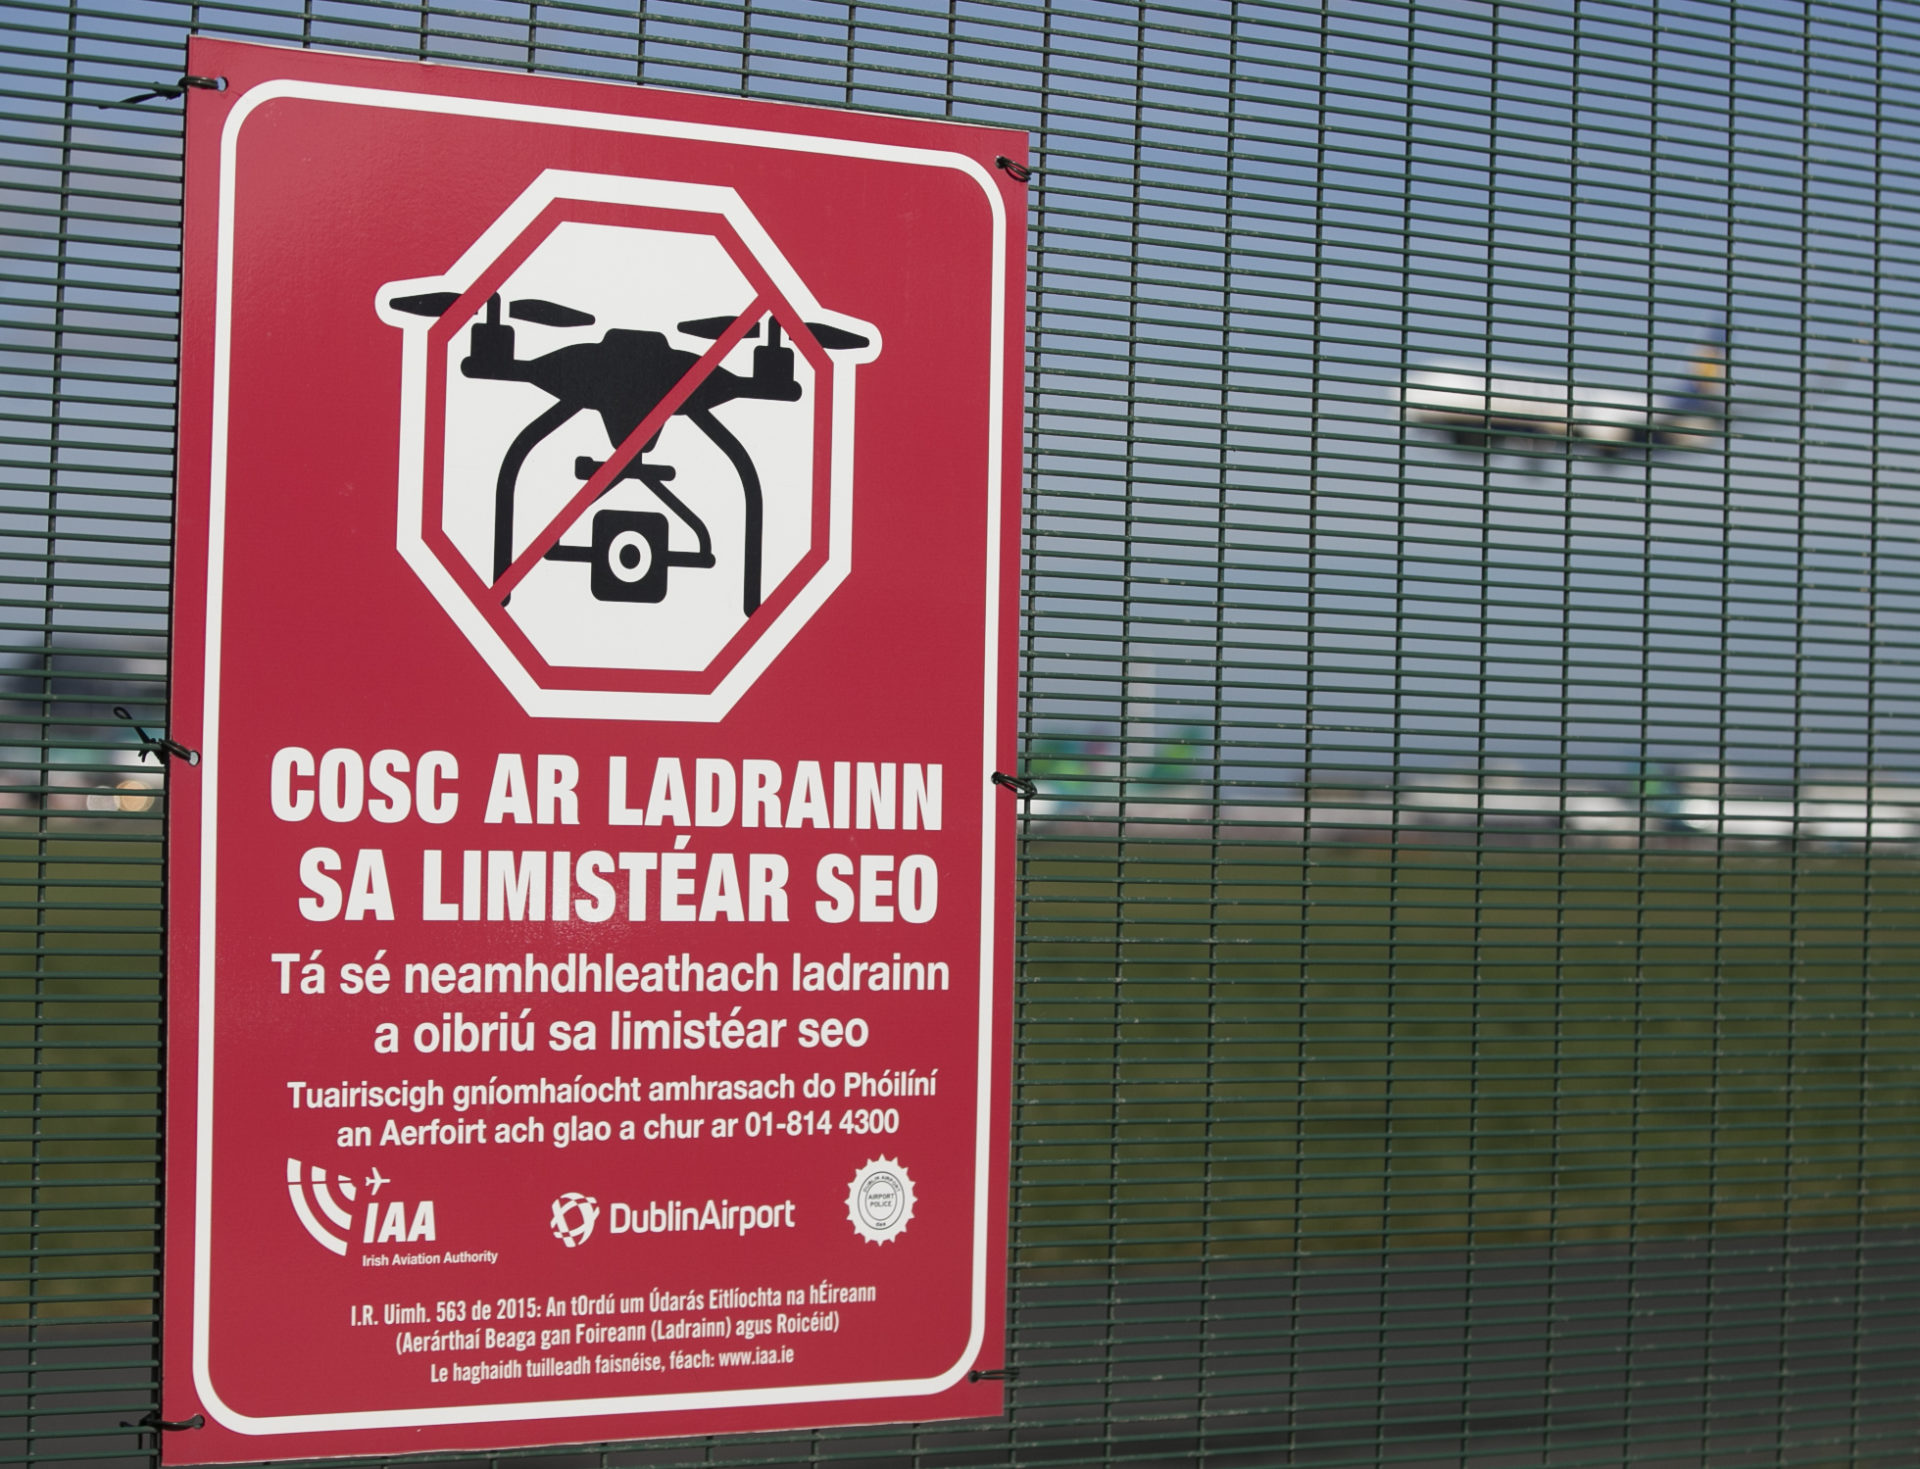 A sign warning against drone use at Dublin Airport